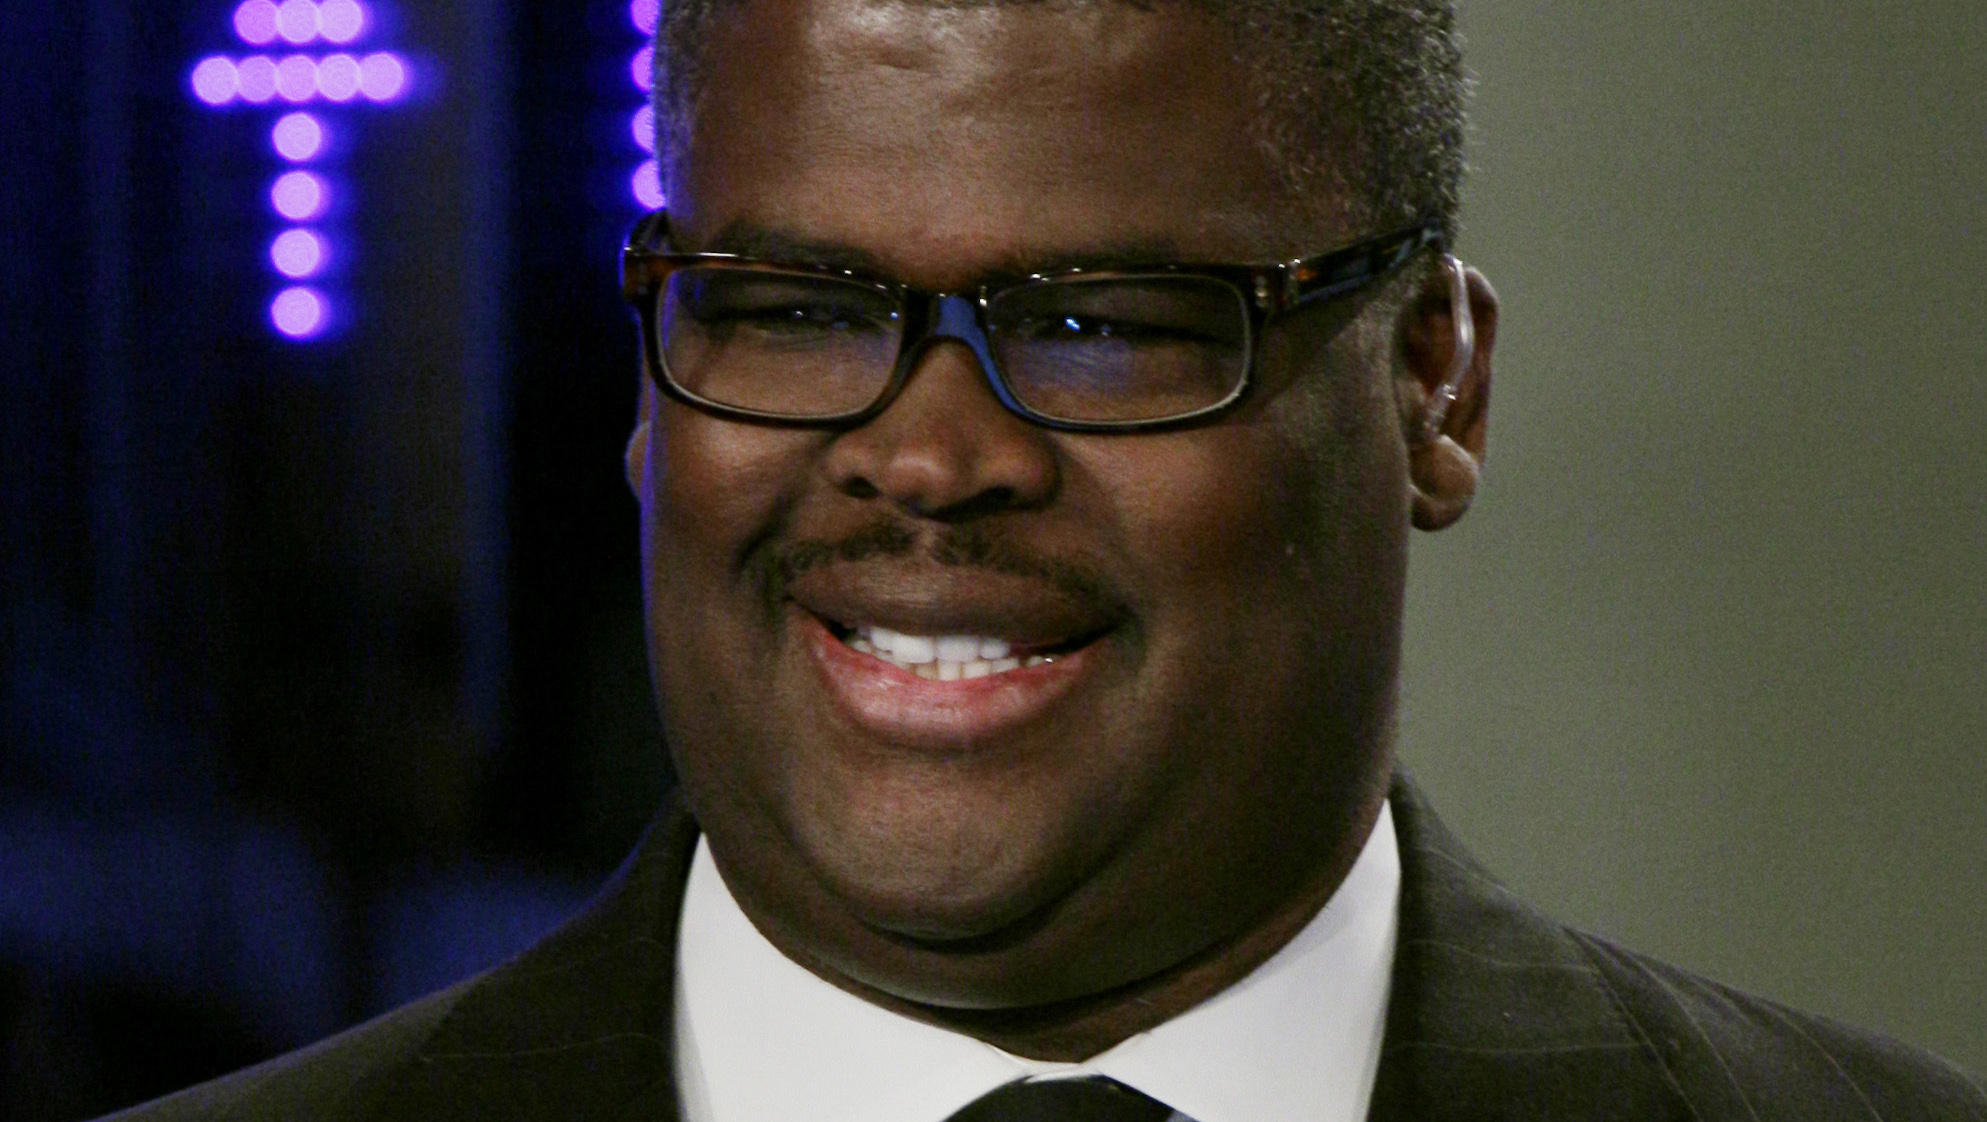 Fox Business host Charles Payne suspended amid sex harassment probe - CBS News1987 x 1122